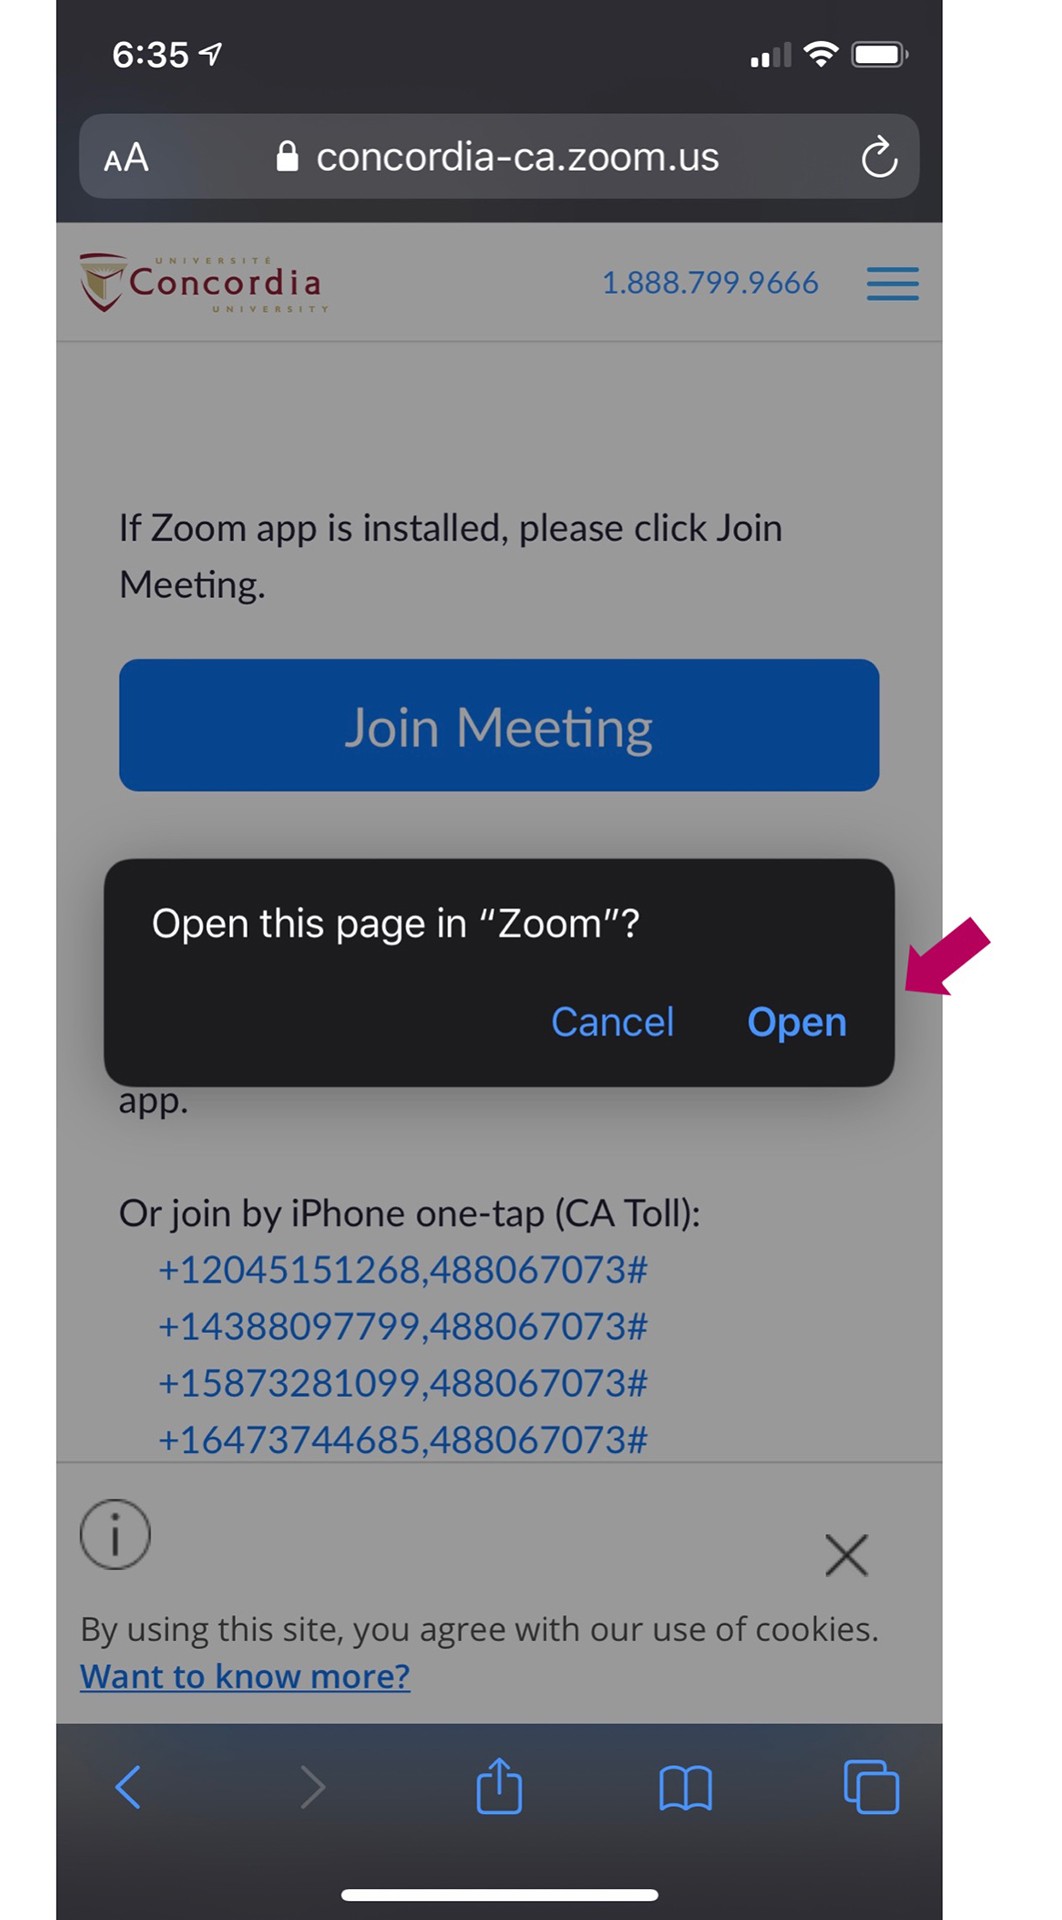 You may be prompted to open Zoom